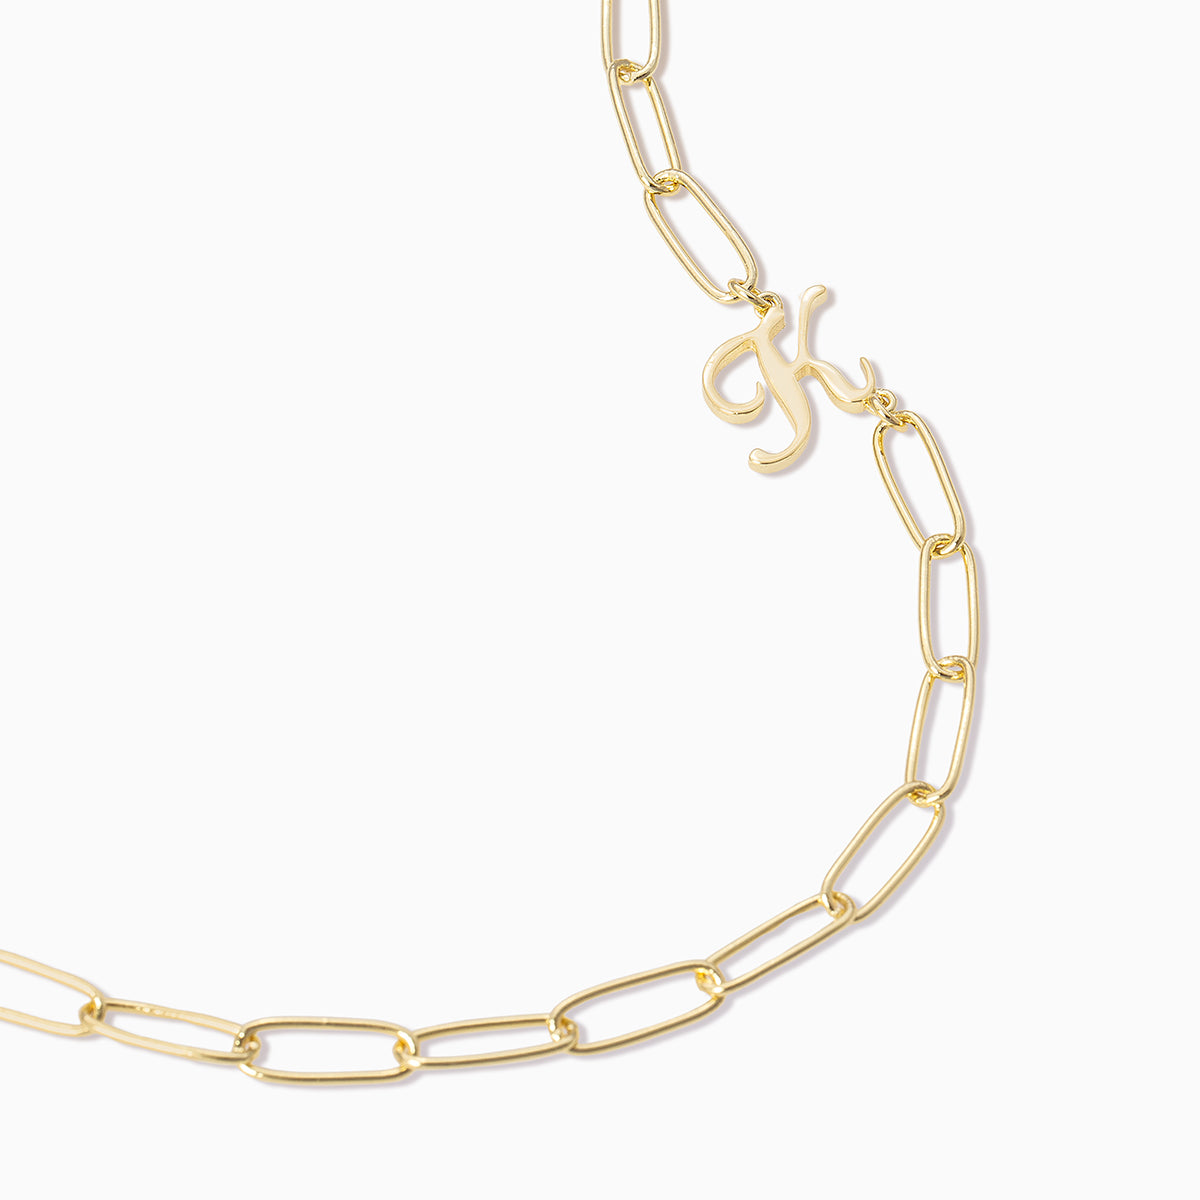 Cursive Initial Necklace | Gold A Gold B Gold C Gold D Gold E Gold F Gold G Gold H Gold I Gold J Gold K Gold L Gold M Gold N Gold O Gold P Gold Q Gold R Gold S Gold T Gold U Gold V Gold W Gold X Gold Y Gold Z | Product Detail Image | Uncommon James